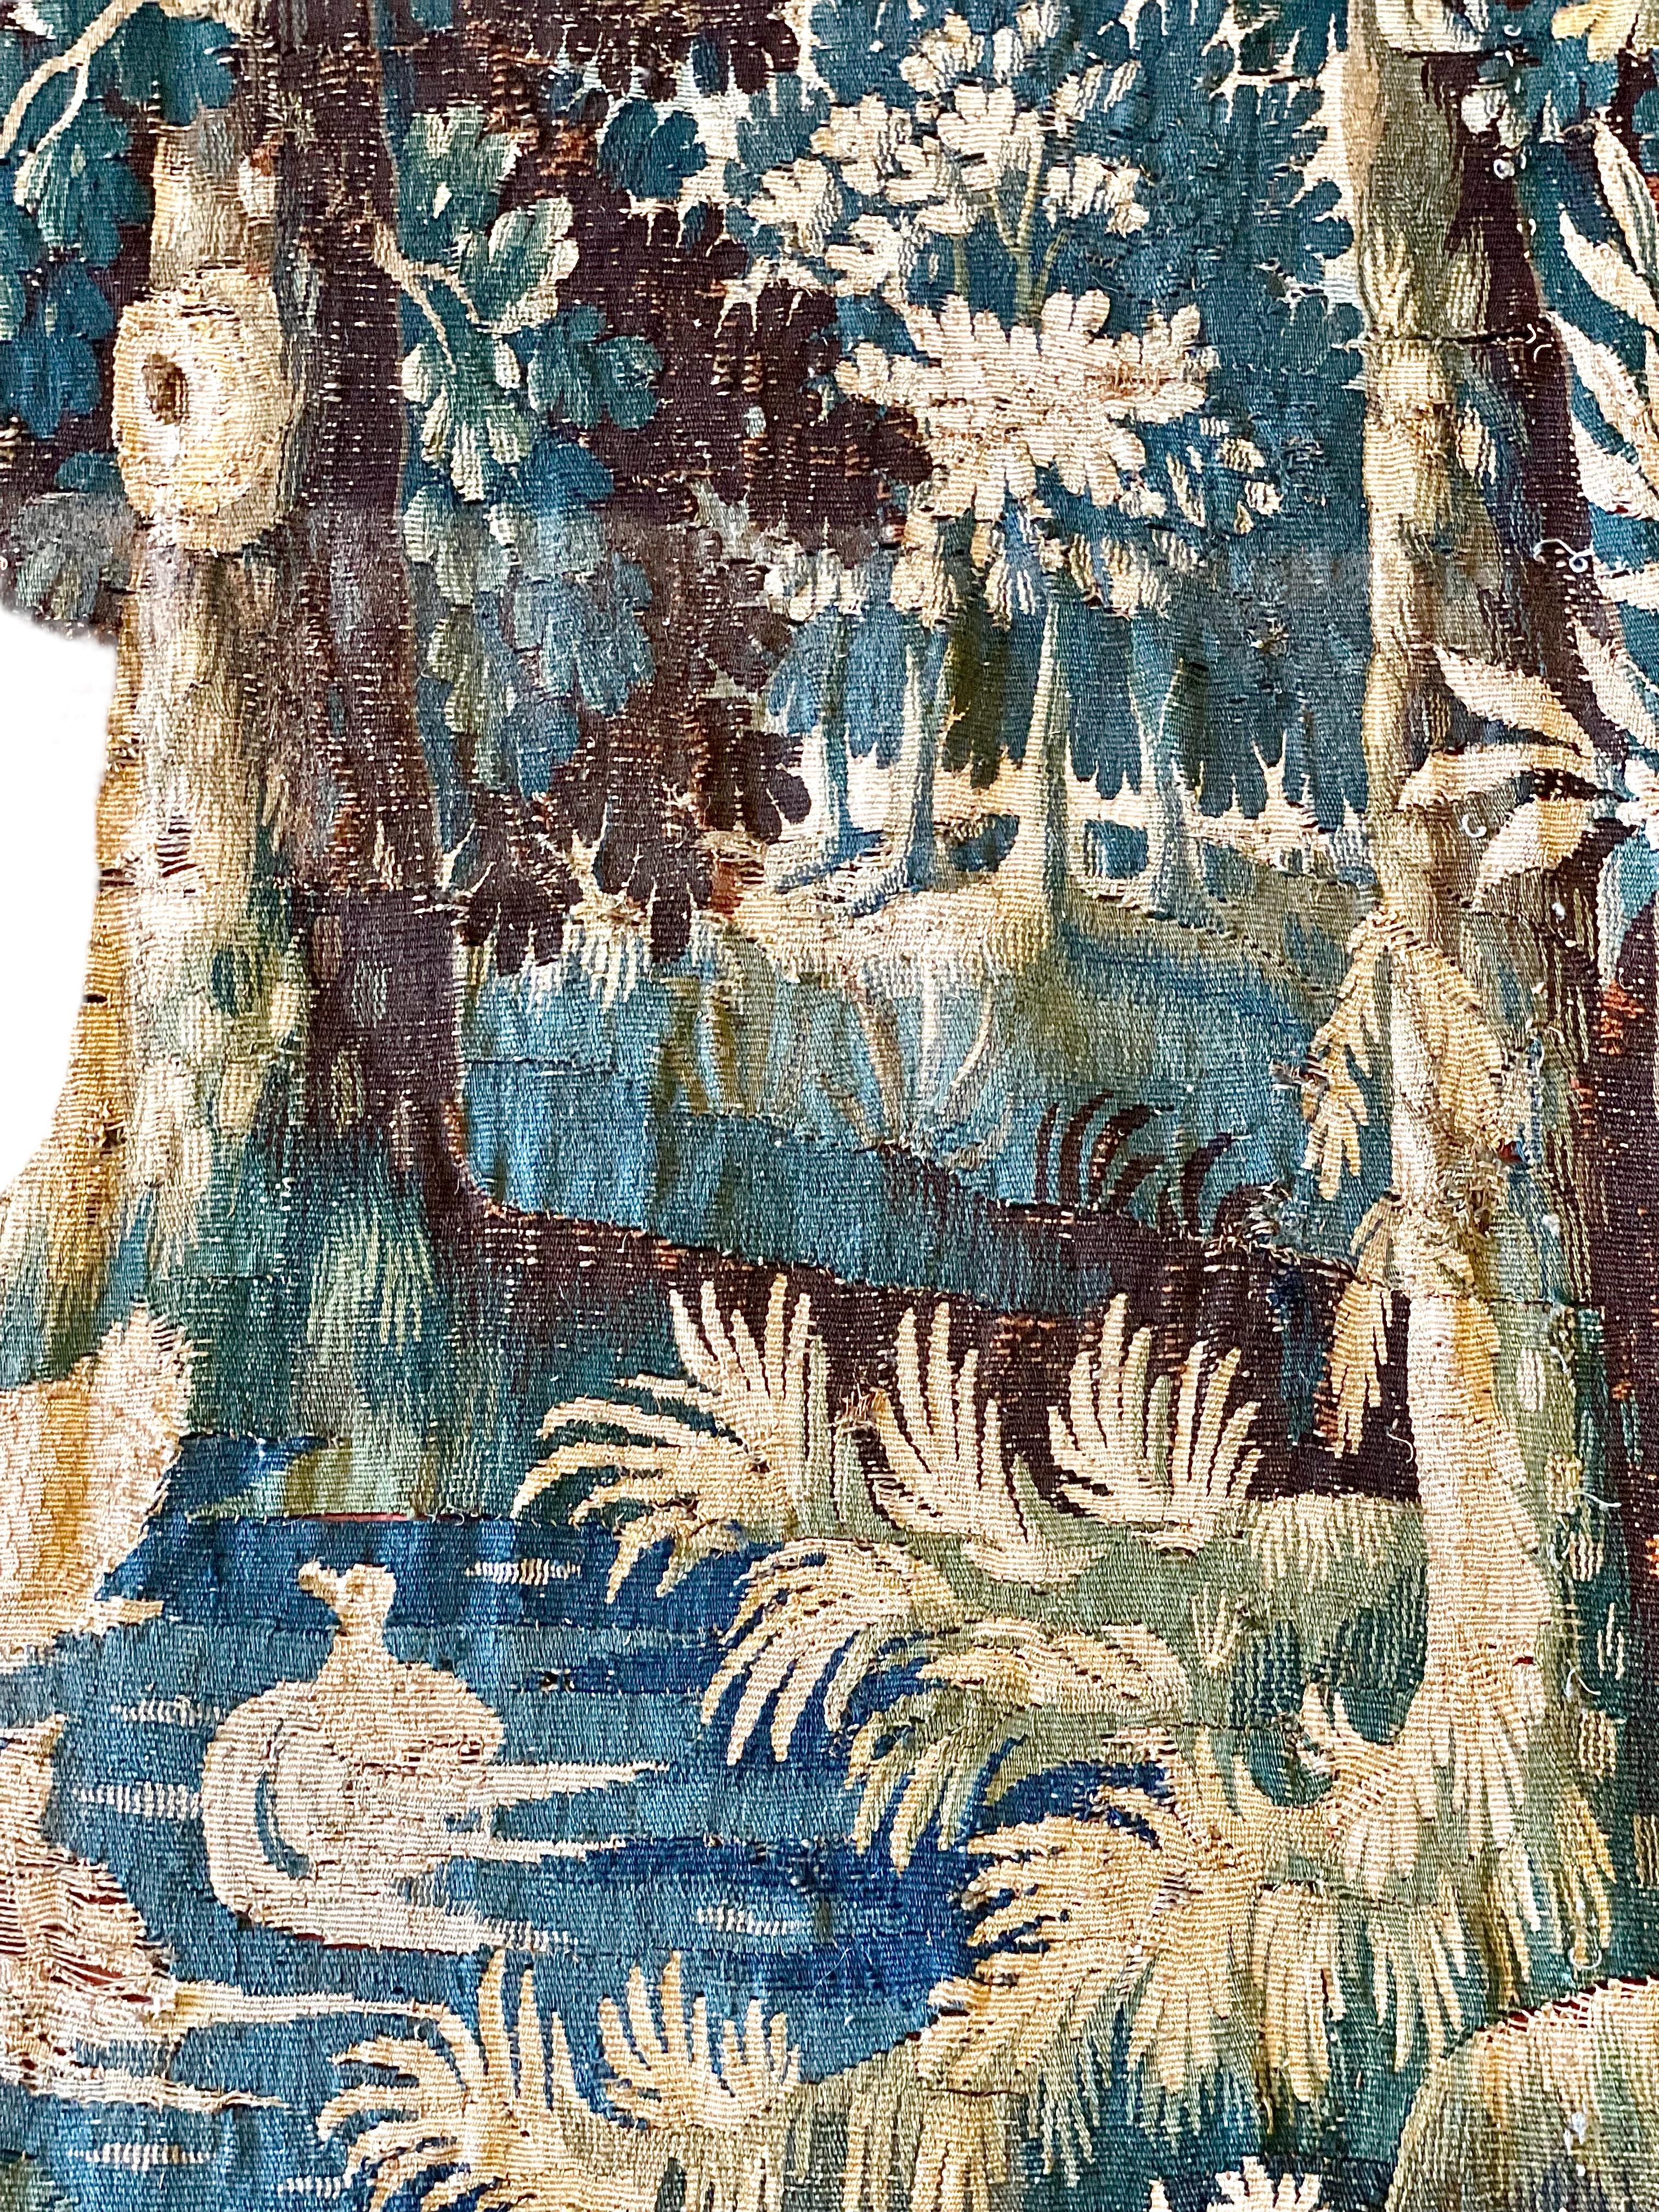 A luxurious 18th-century Aubusson tapestry, depicting a dog barking at fowl on a river, in a typically rural and architectural-themed landscape. Hand-woven in wool, in predominantly green and cream hues with a border on all sides, this antique wall